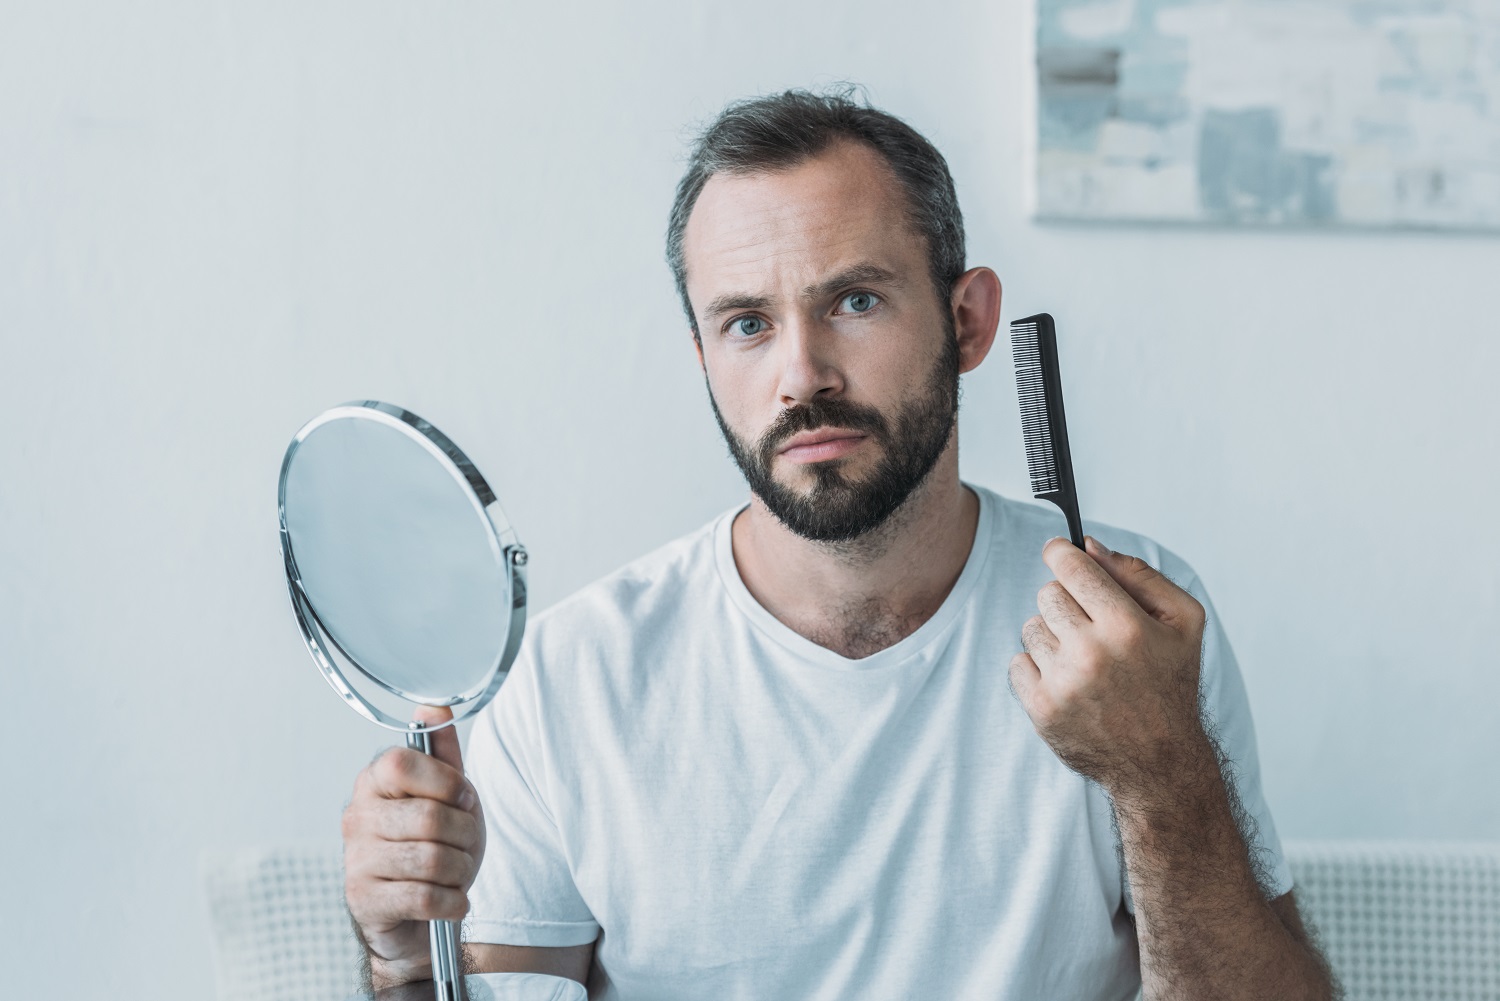 Can You Use Someone Else's Hair For A Hair Transplant?